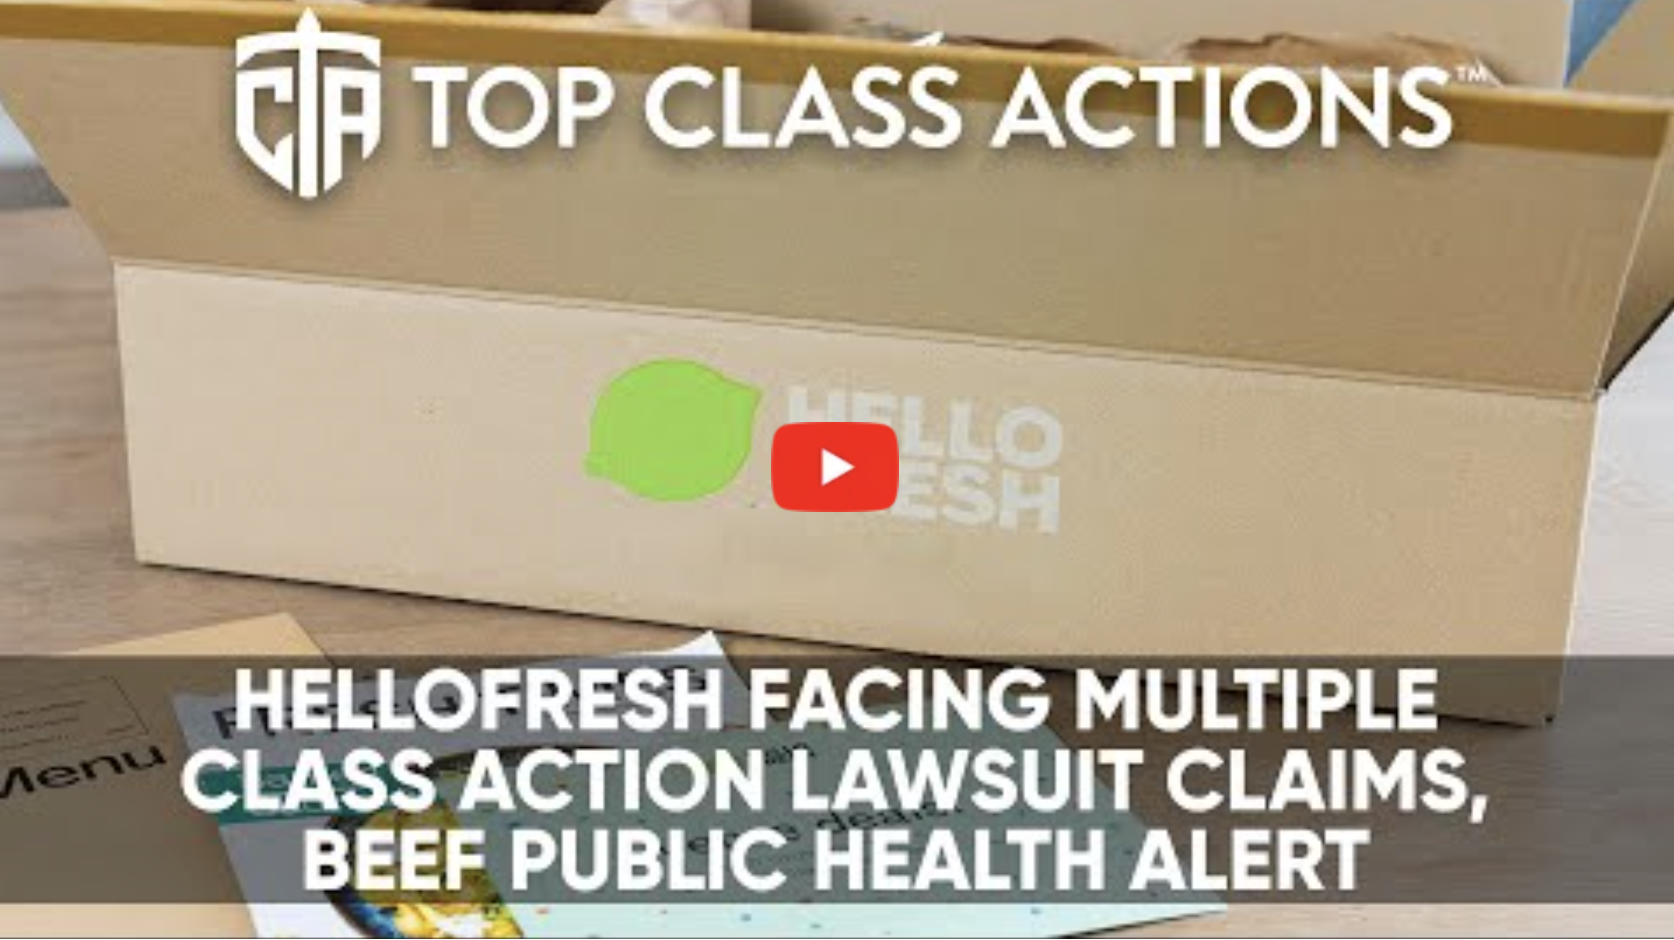 Top Class Actions - Hello Fresh facing multiple class action lawsuit claims, beef public health alert